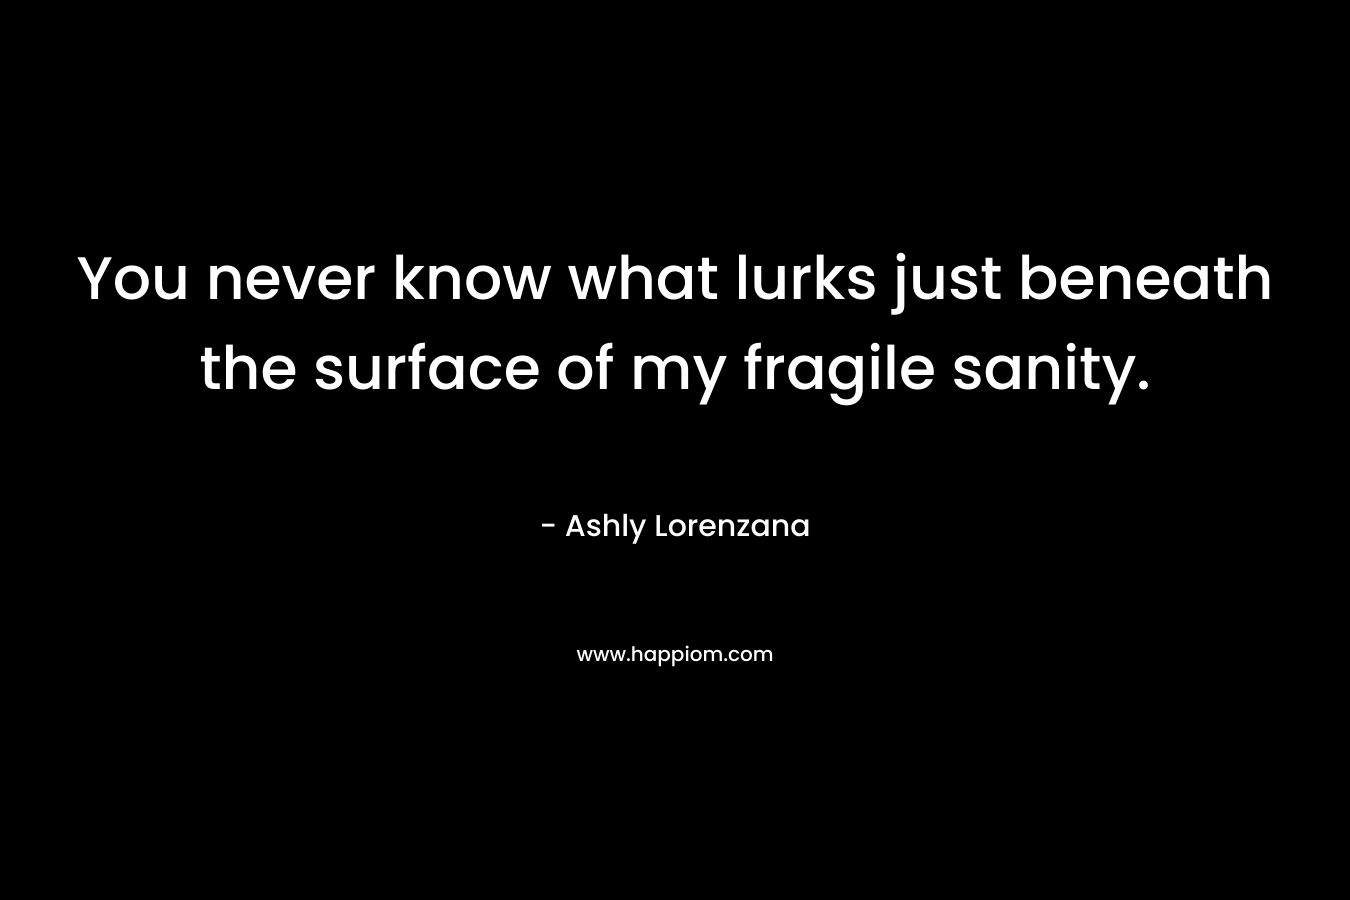 You never know what lurks just beneath the surface of my fragile sanity. – Ashly Lorenzana